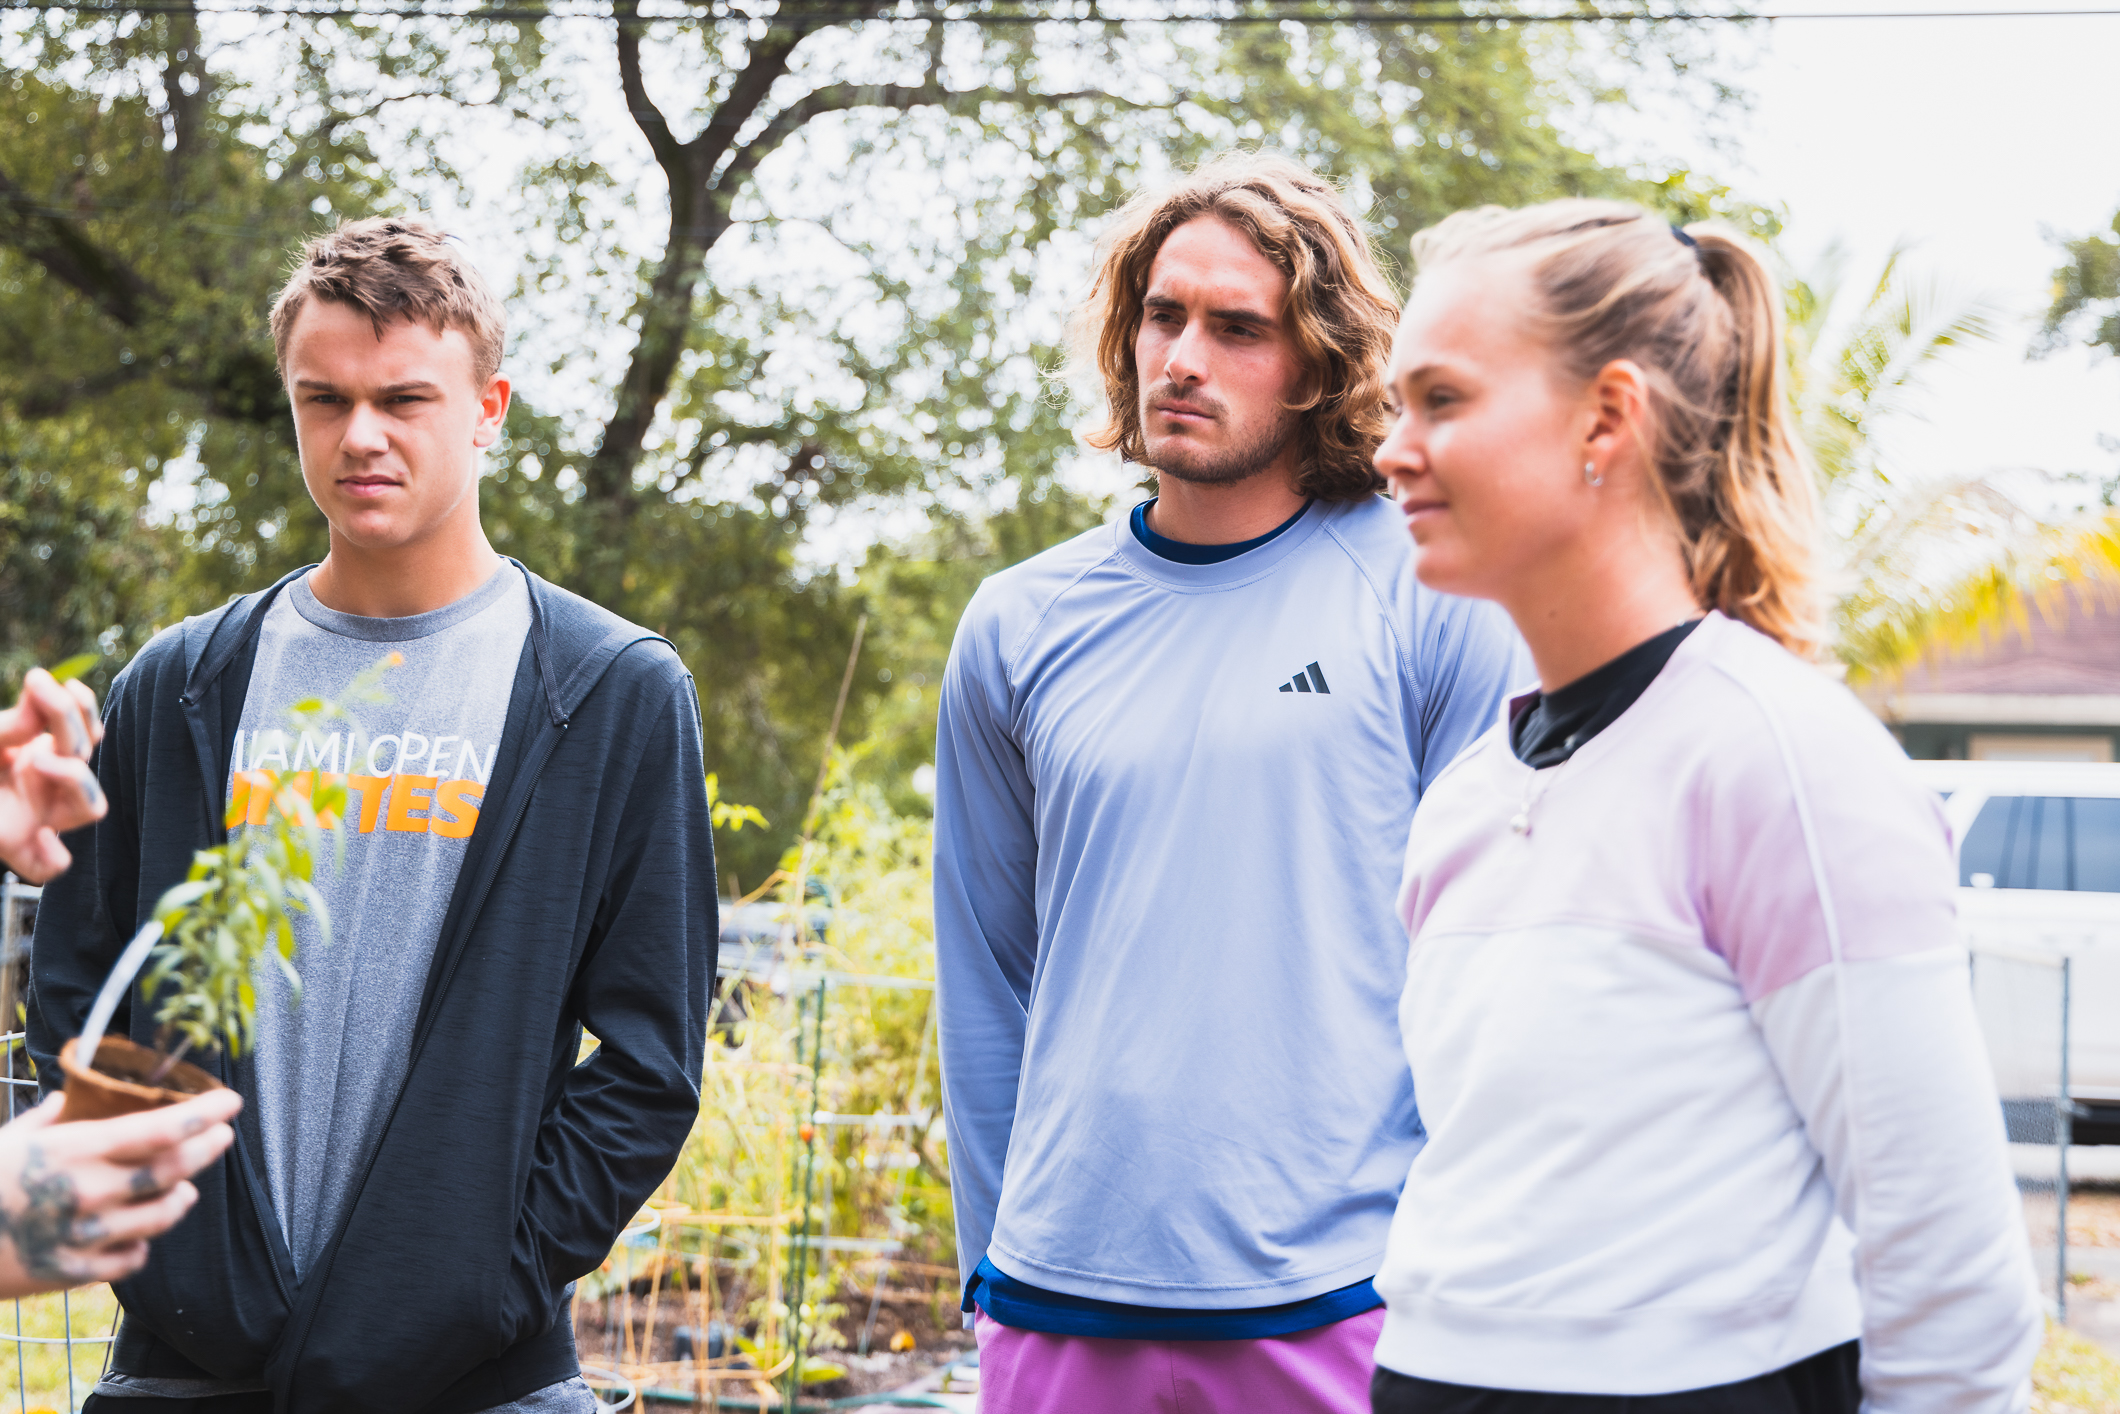 Holger Rune, Stefanos Tsitsipas, and Marie Bouzkova at the Health in the Health Miami Open Unites event on March 20, 2023